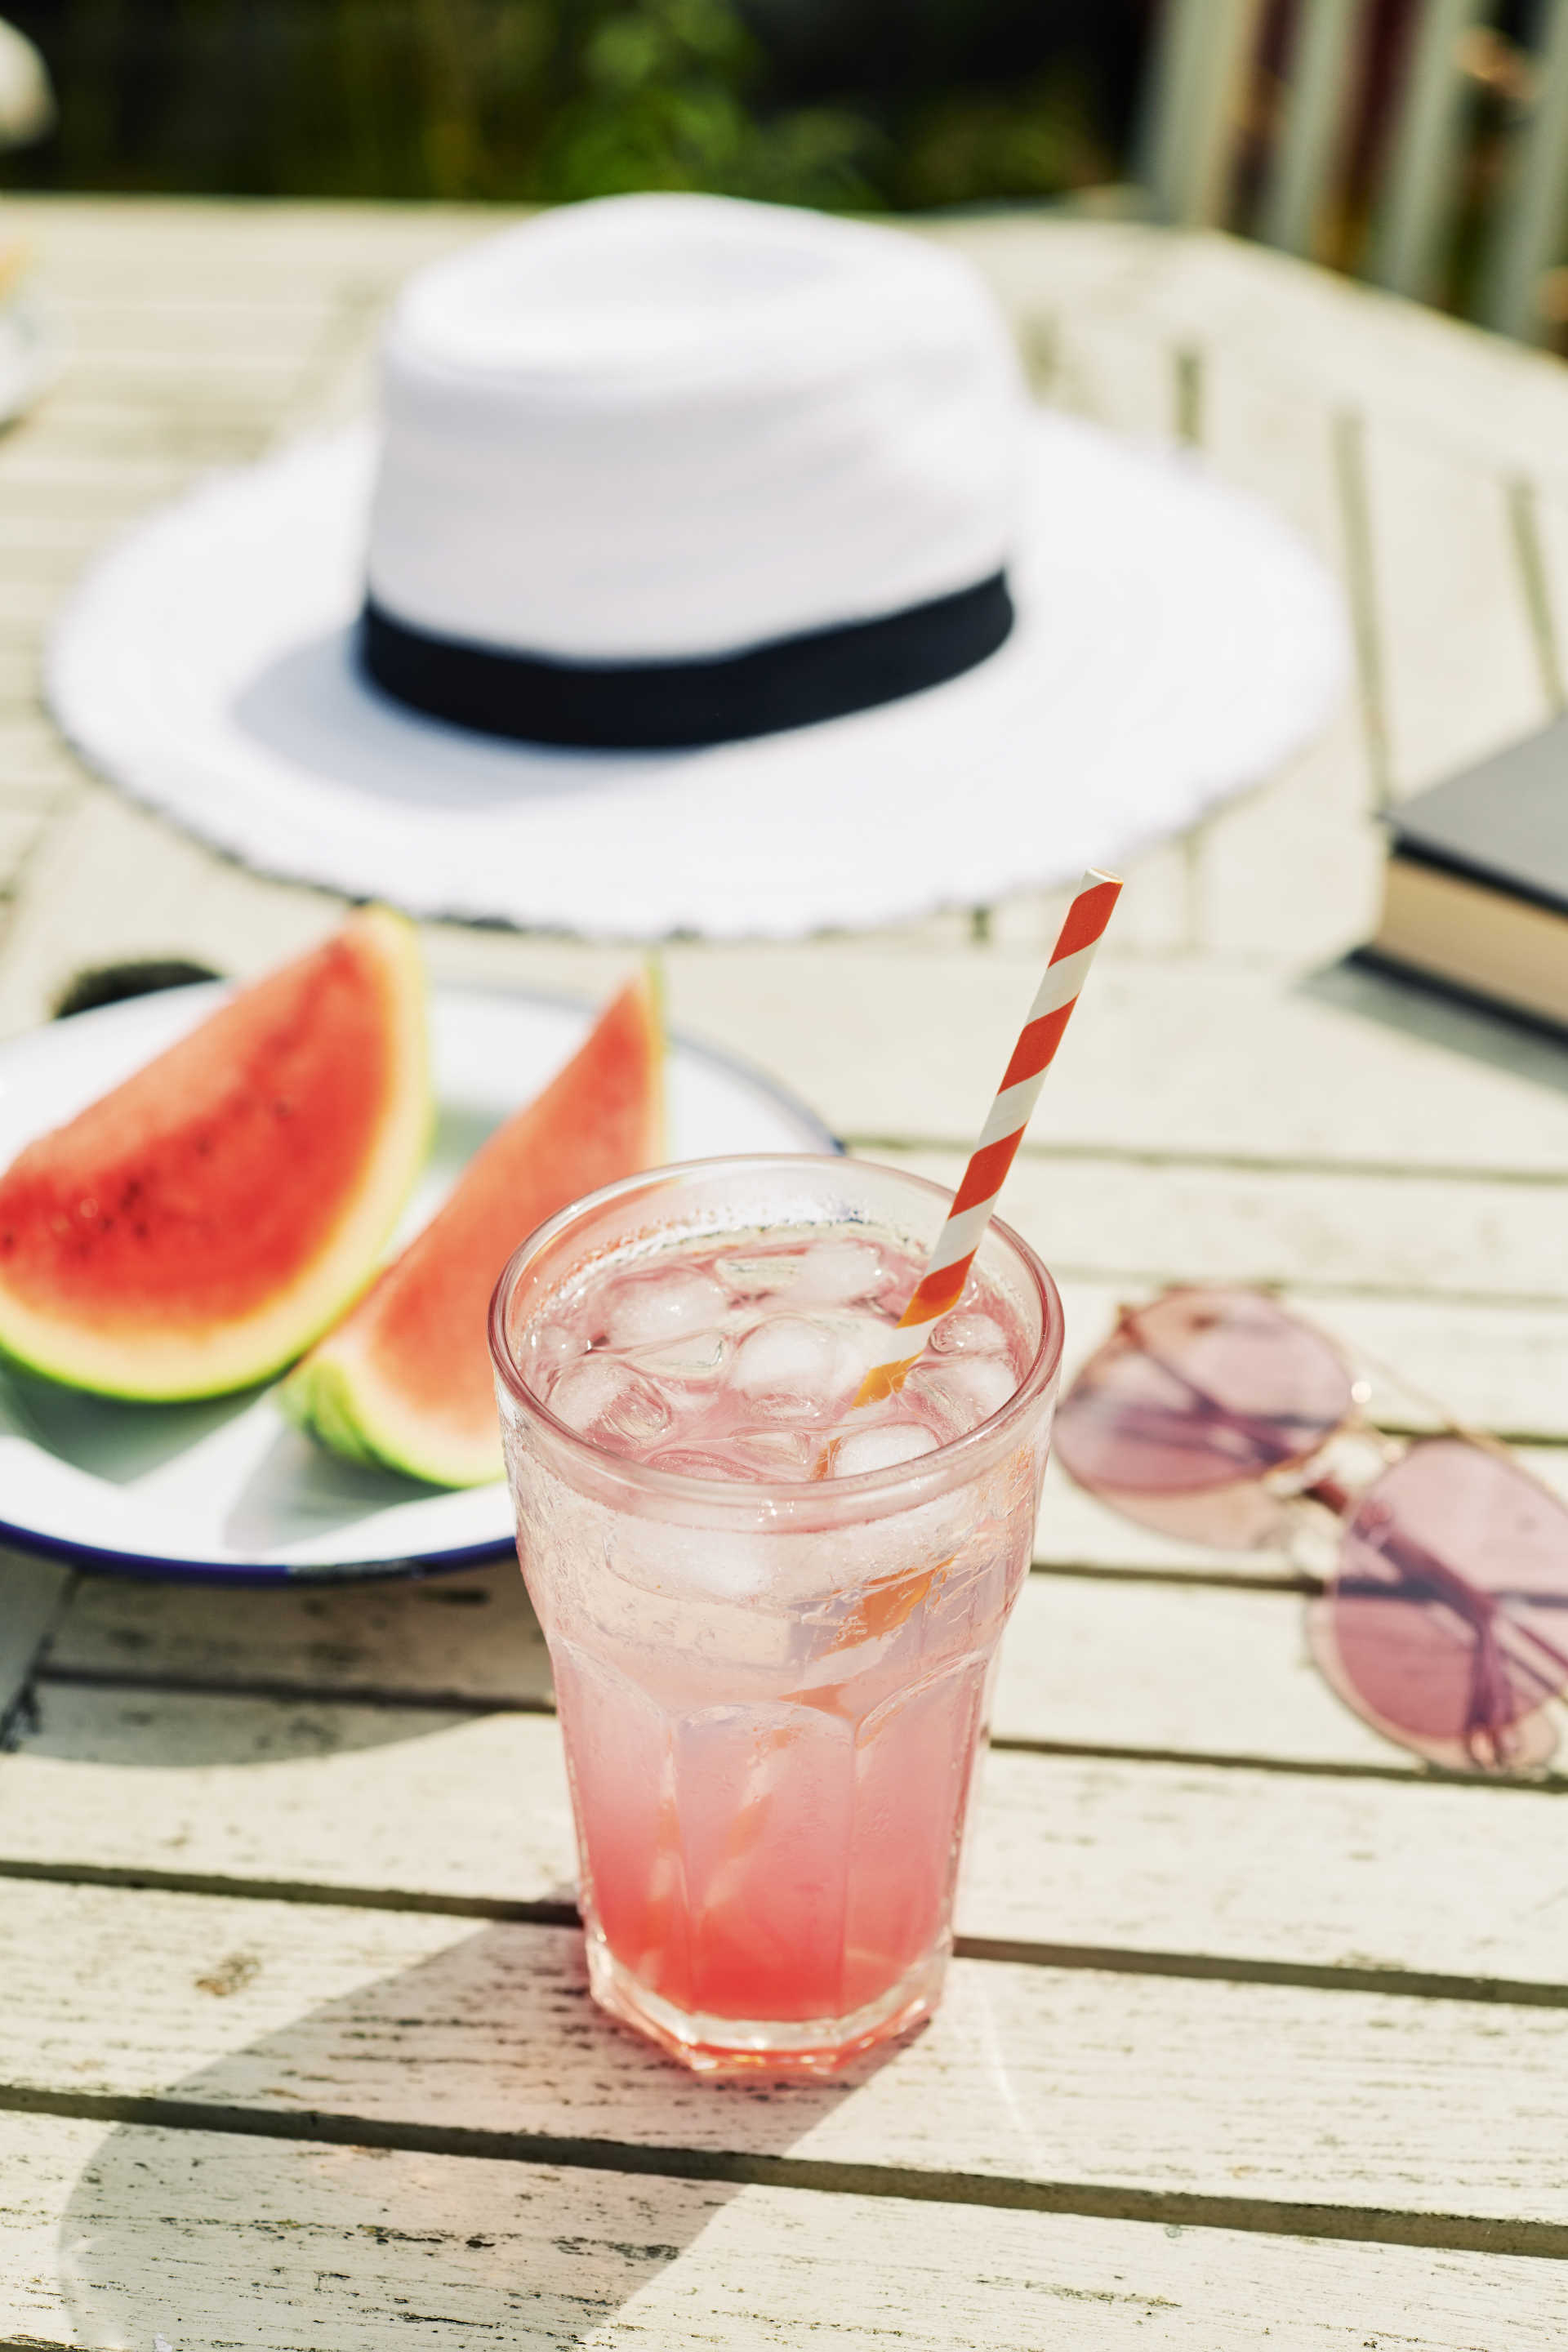 A glass of a melonium cocktail on a table outdoors along with a sliced watermelon, sunglasses and a hat